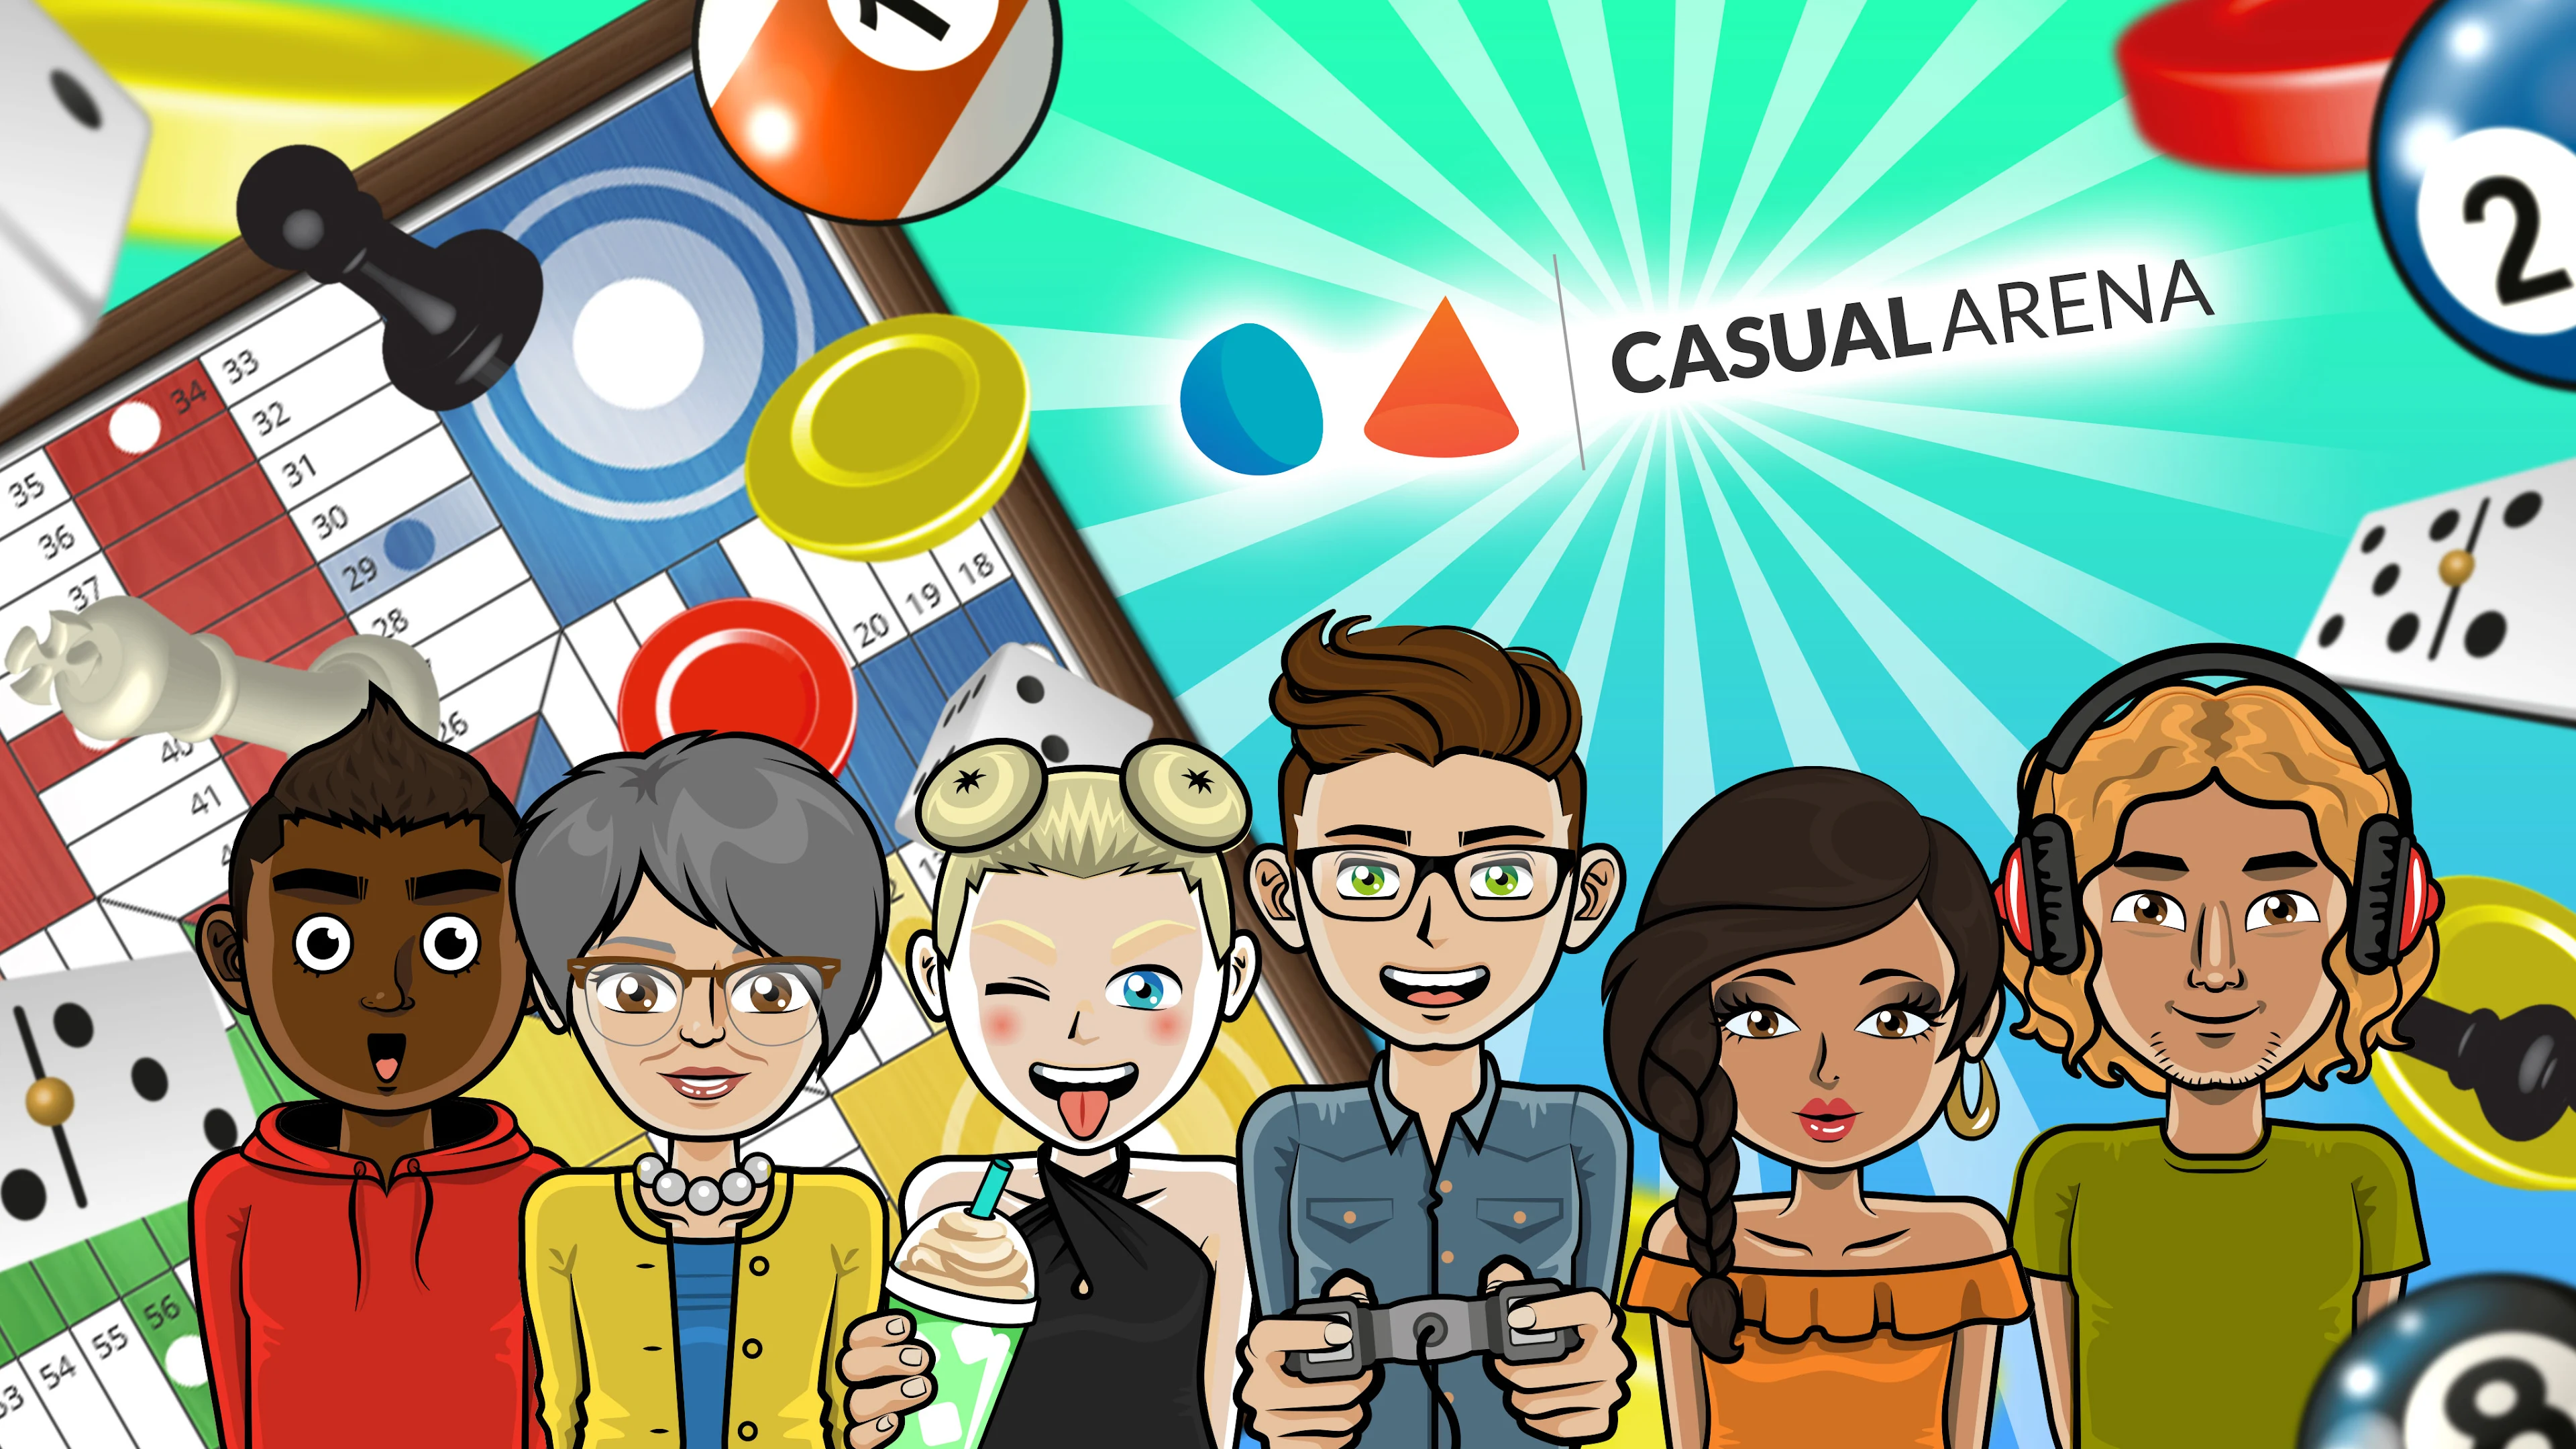 Welcome to Casualarena.com - Free multiplayer online games - Casual Arena